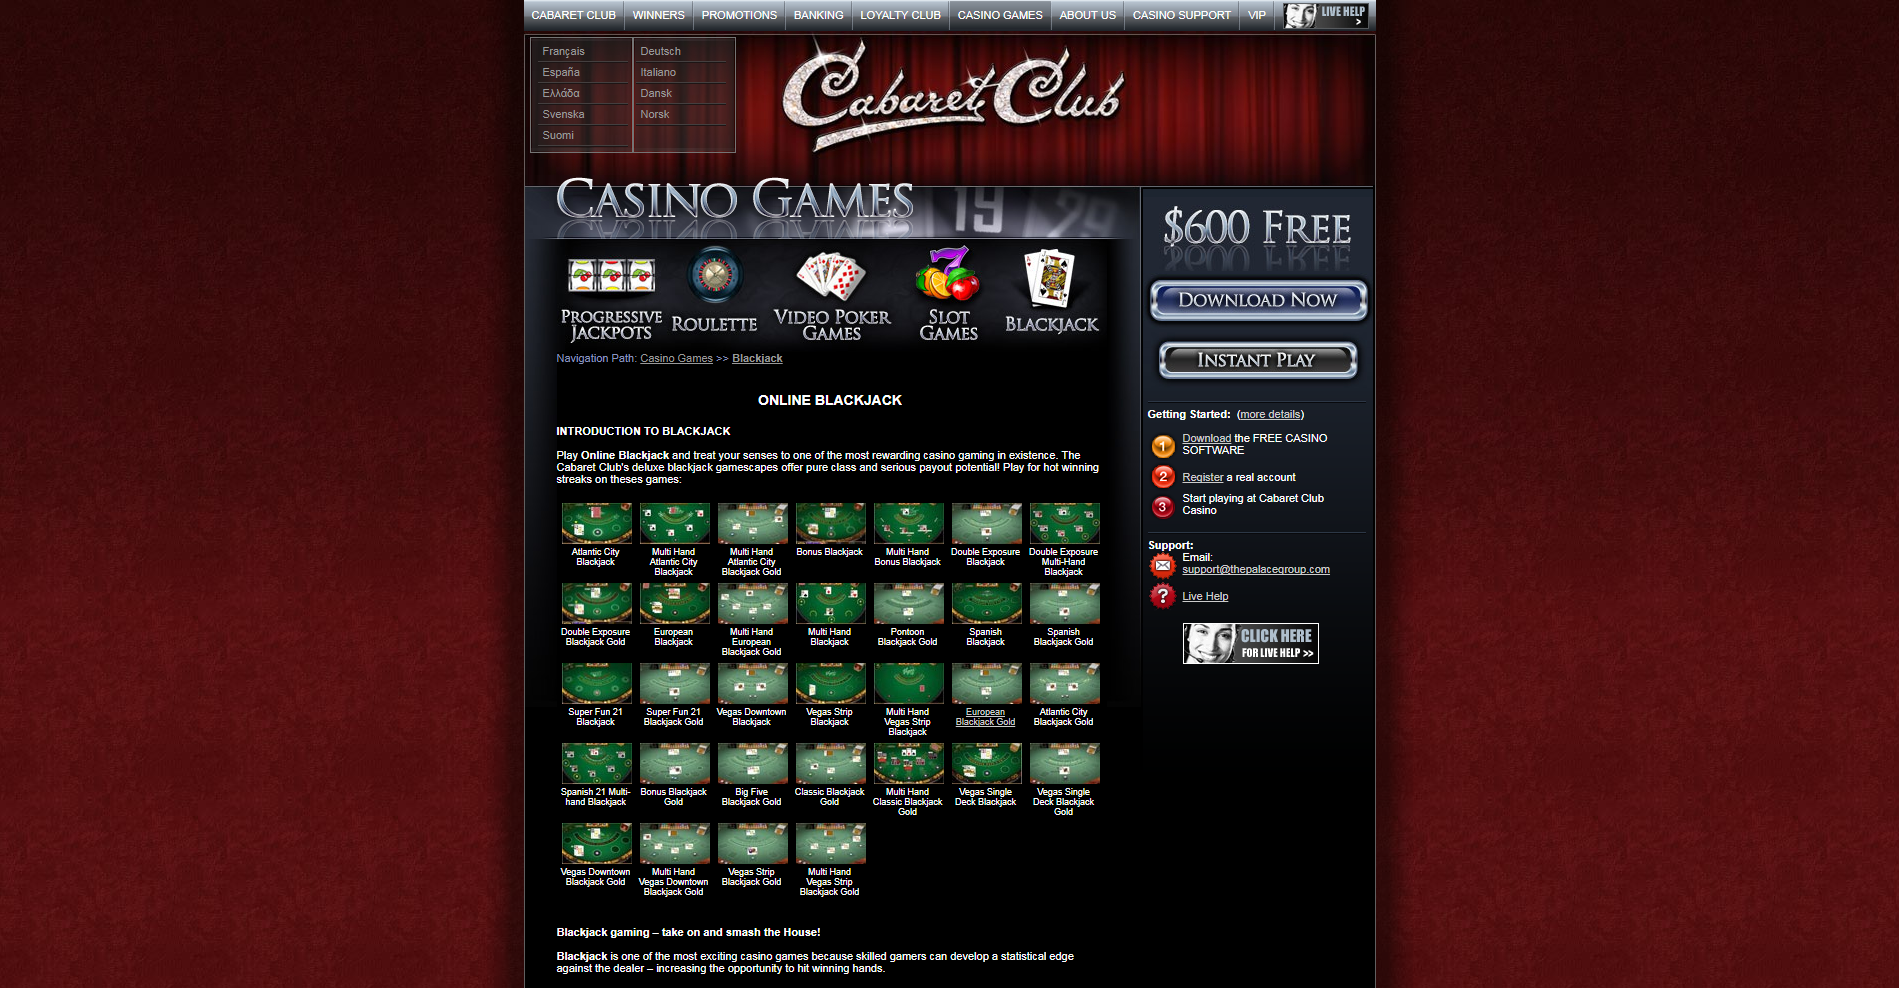 Cabaret Club Casino Review - Are They a Trustworthy Site in 2023?